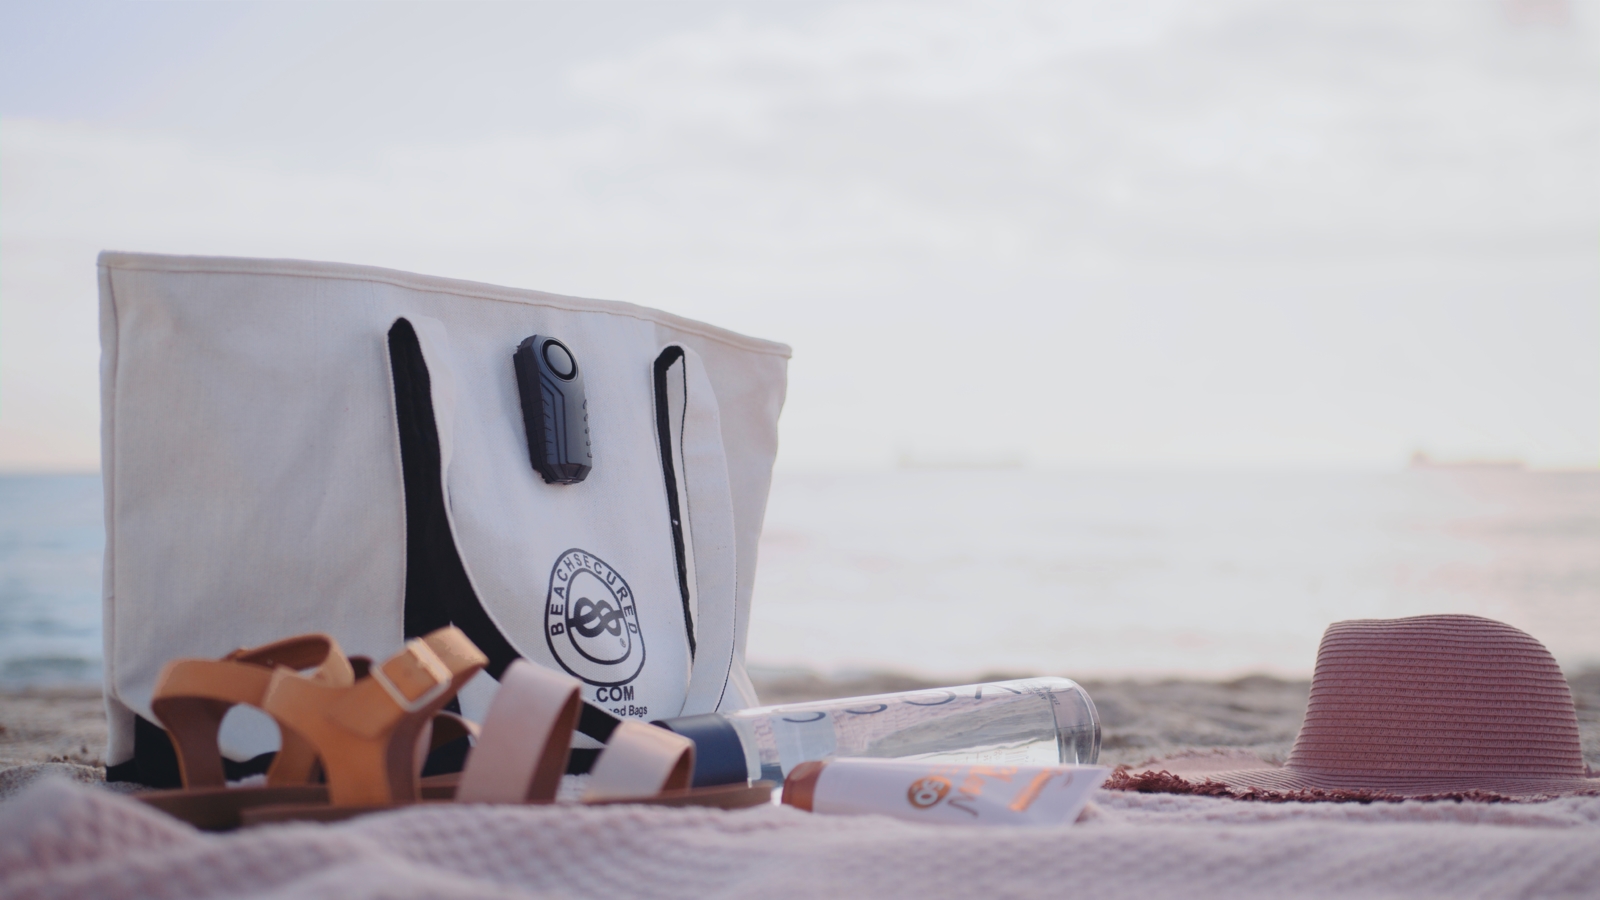 What Your Amazon Ads are Missing Black and white Beachsecured bag in the sand with brown sandals, lotion, water bottle as well as pink hat and beach towel